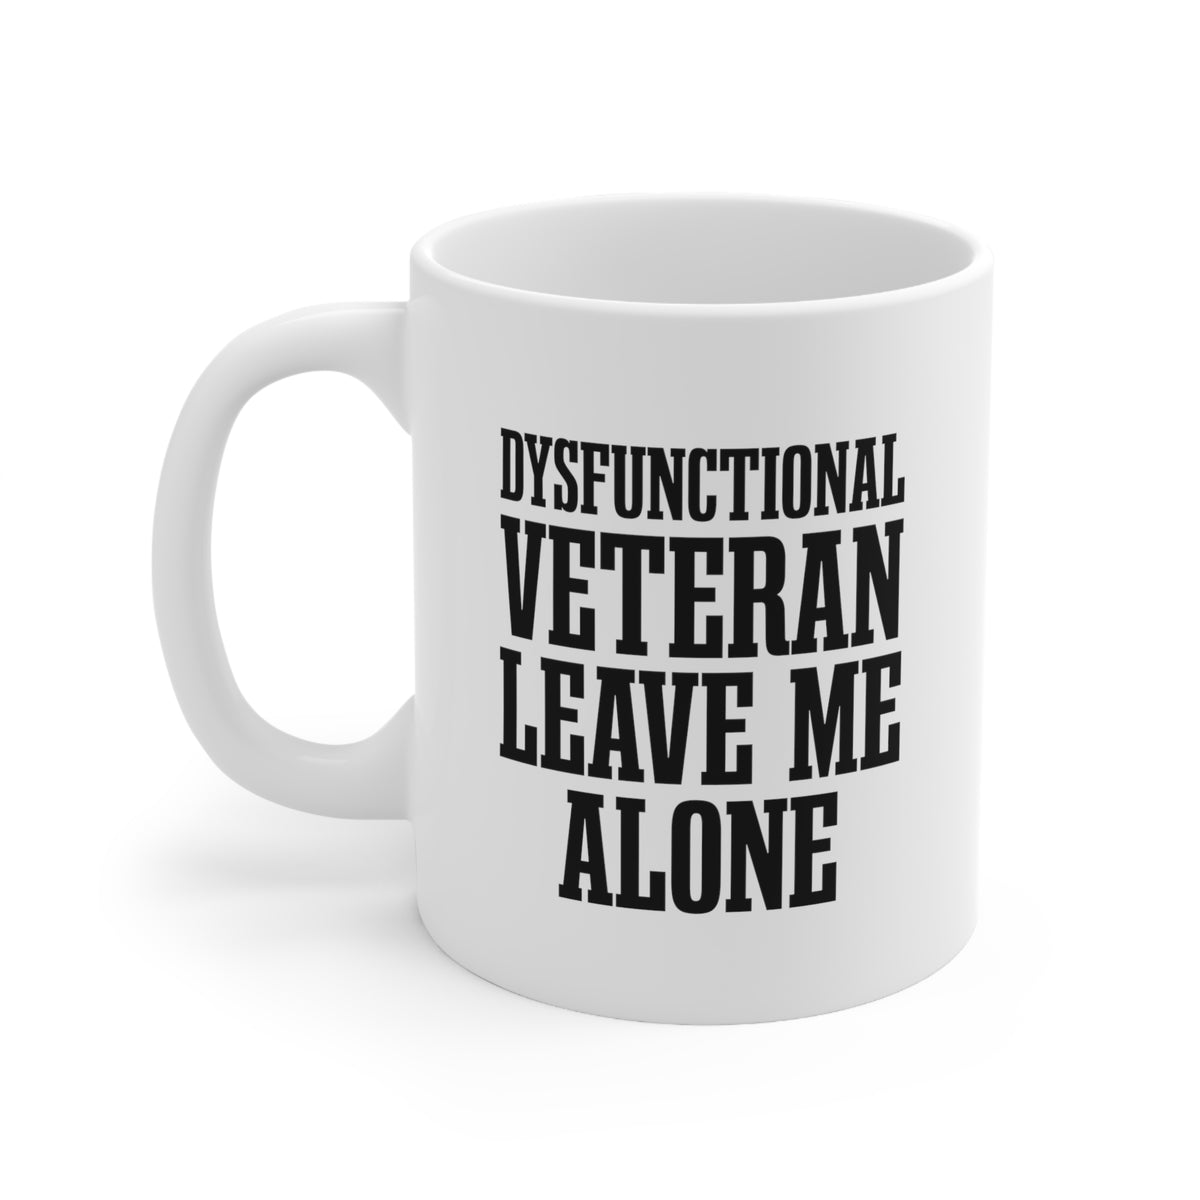 Coffee Mug for Retired Army Navy Vietnam Veteran - Dysfunctional Veteran Leave me alone - Unique Funny Gifts